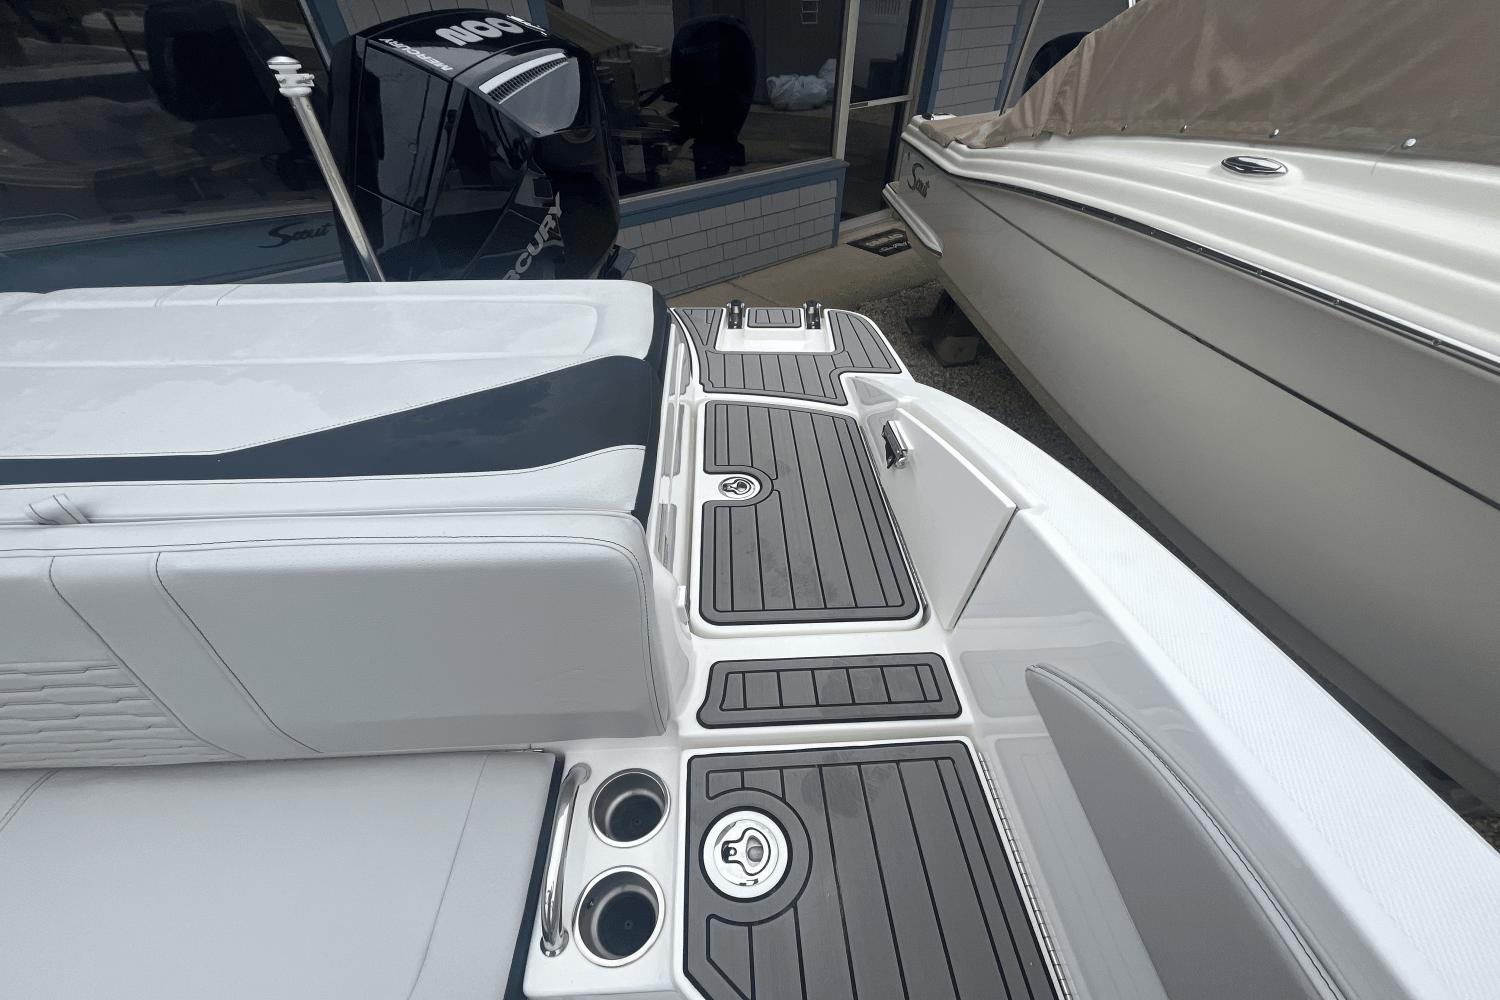 2024 Sea Ray SPX 210 Outboard Runabout for sale - YachtWorld